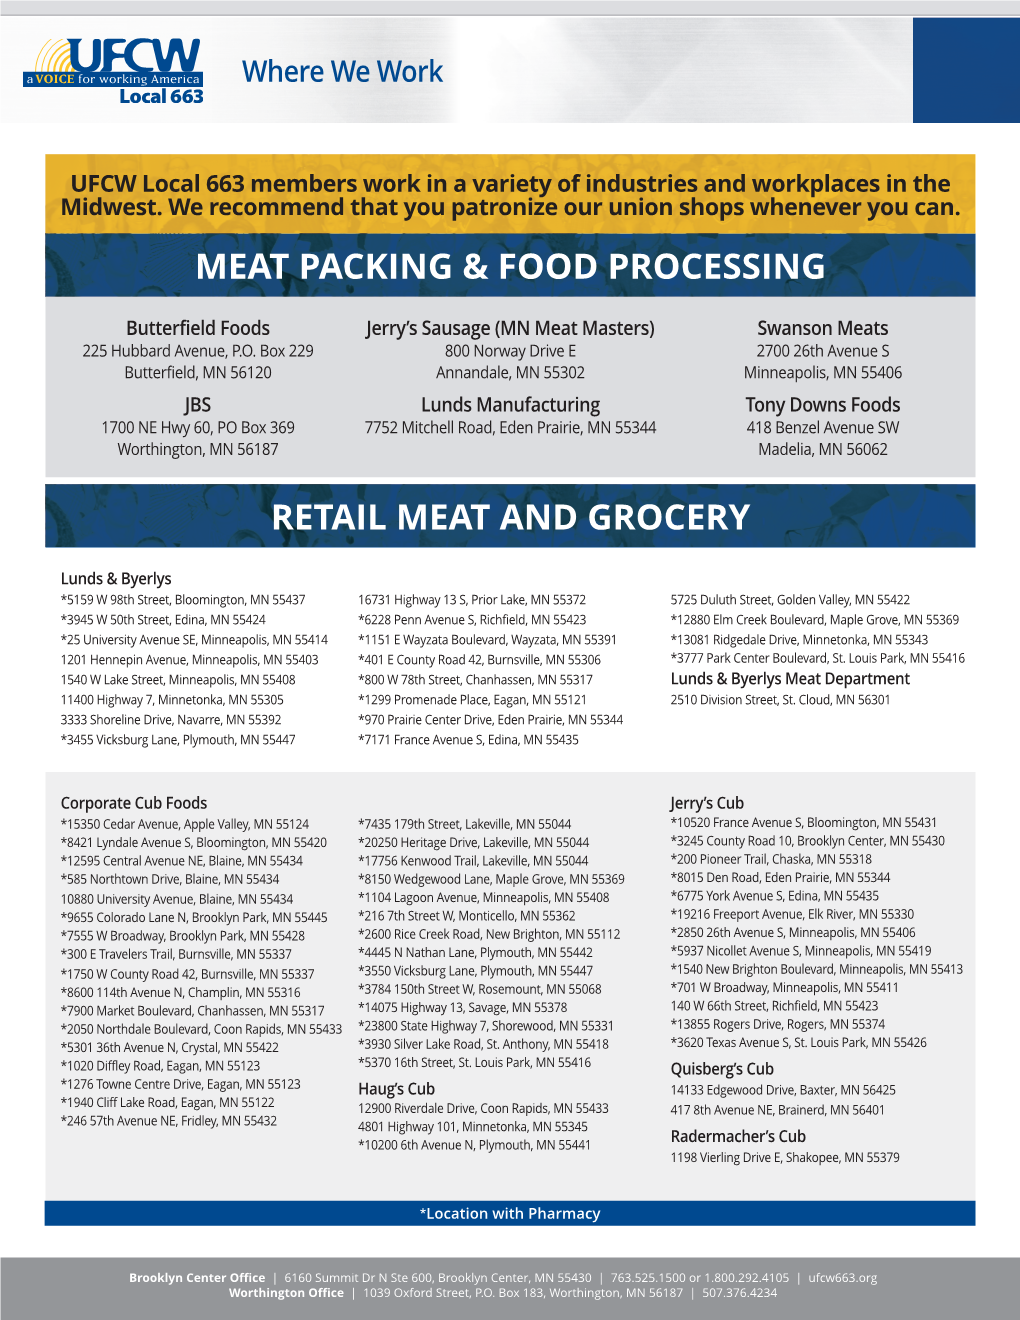 Meat Packing & Food Processing Retail Meat and Grocery